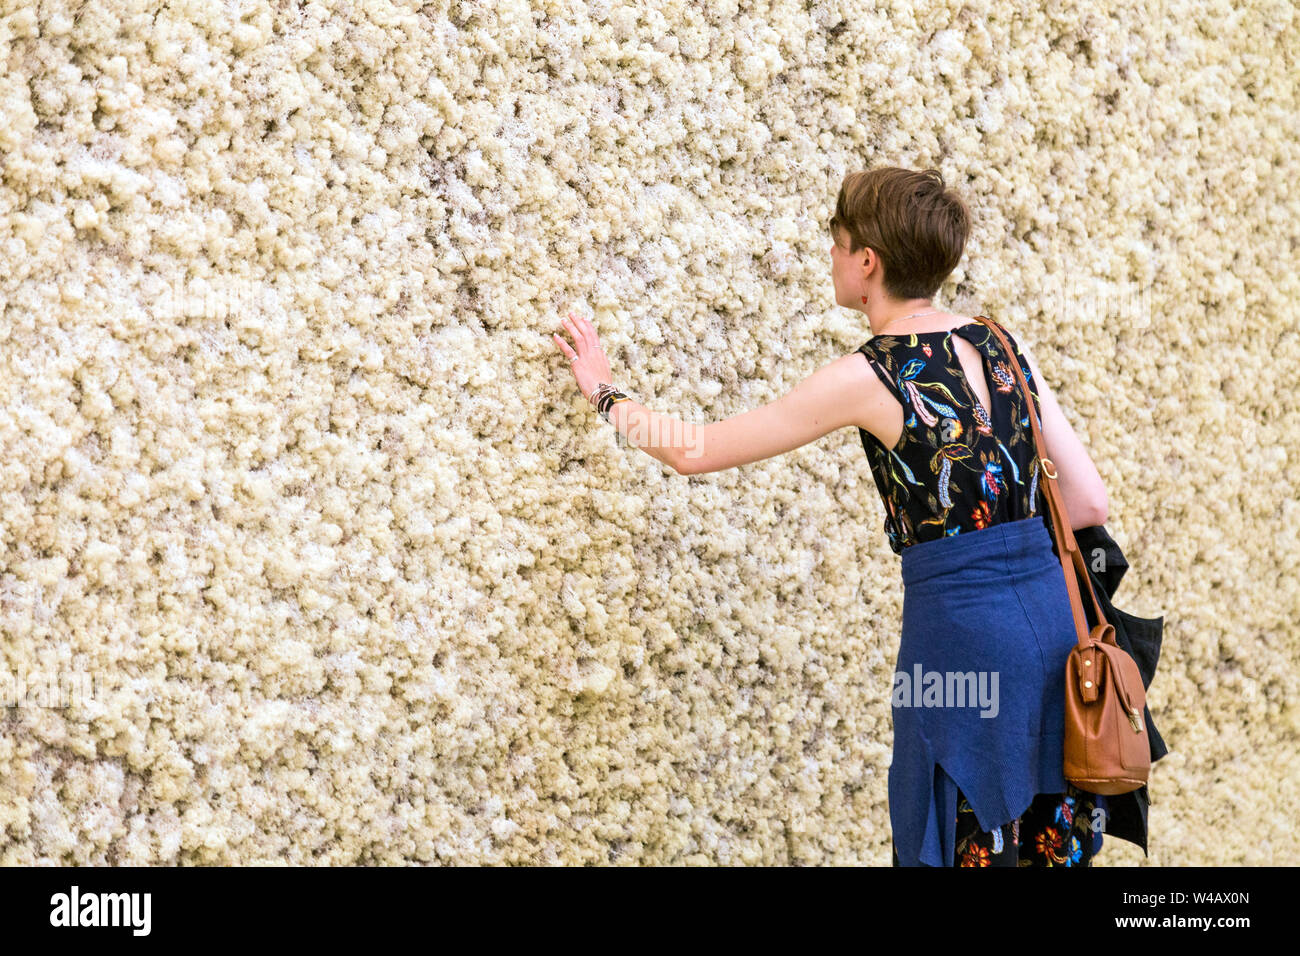 Olafur Eliasson 'Moss Wall' 1009, 'In Real Life' 2019 exhibition at the Tate Modern, London, UK Stock Photo